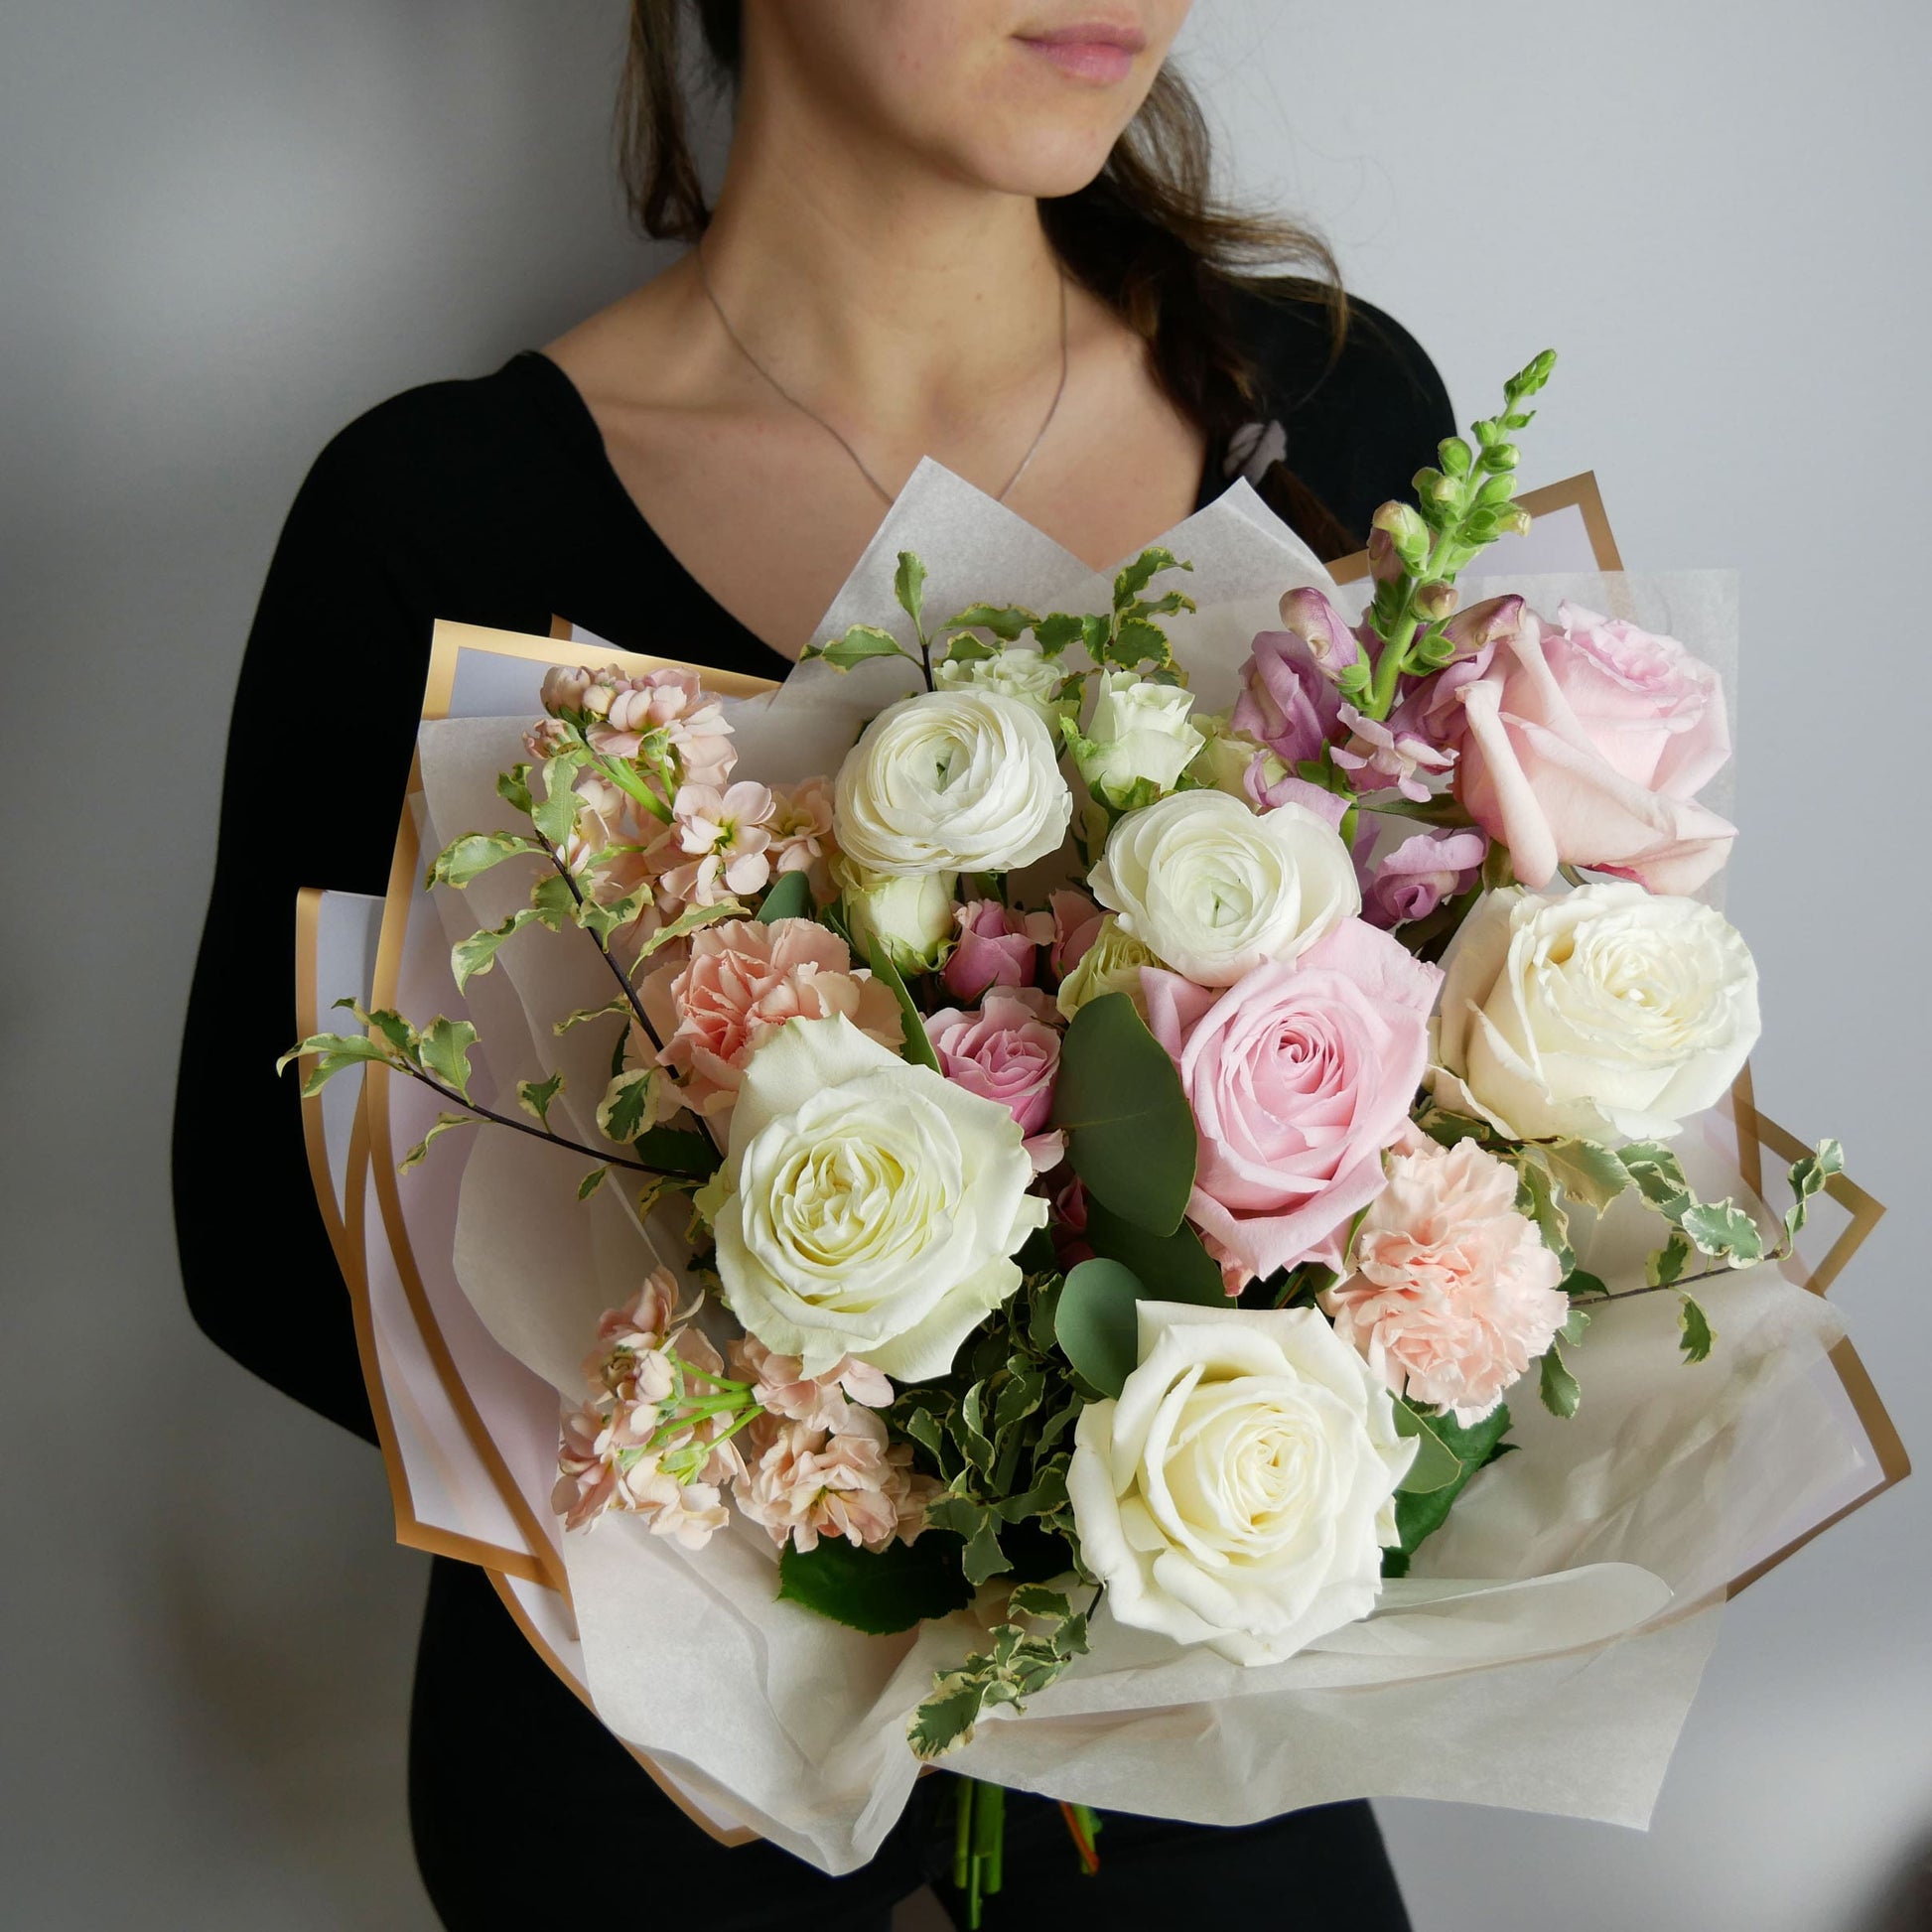 Tender pink and white wrapped bouquet featuring ranunculus, roses, stock and more